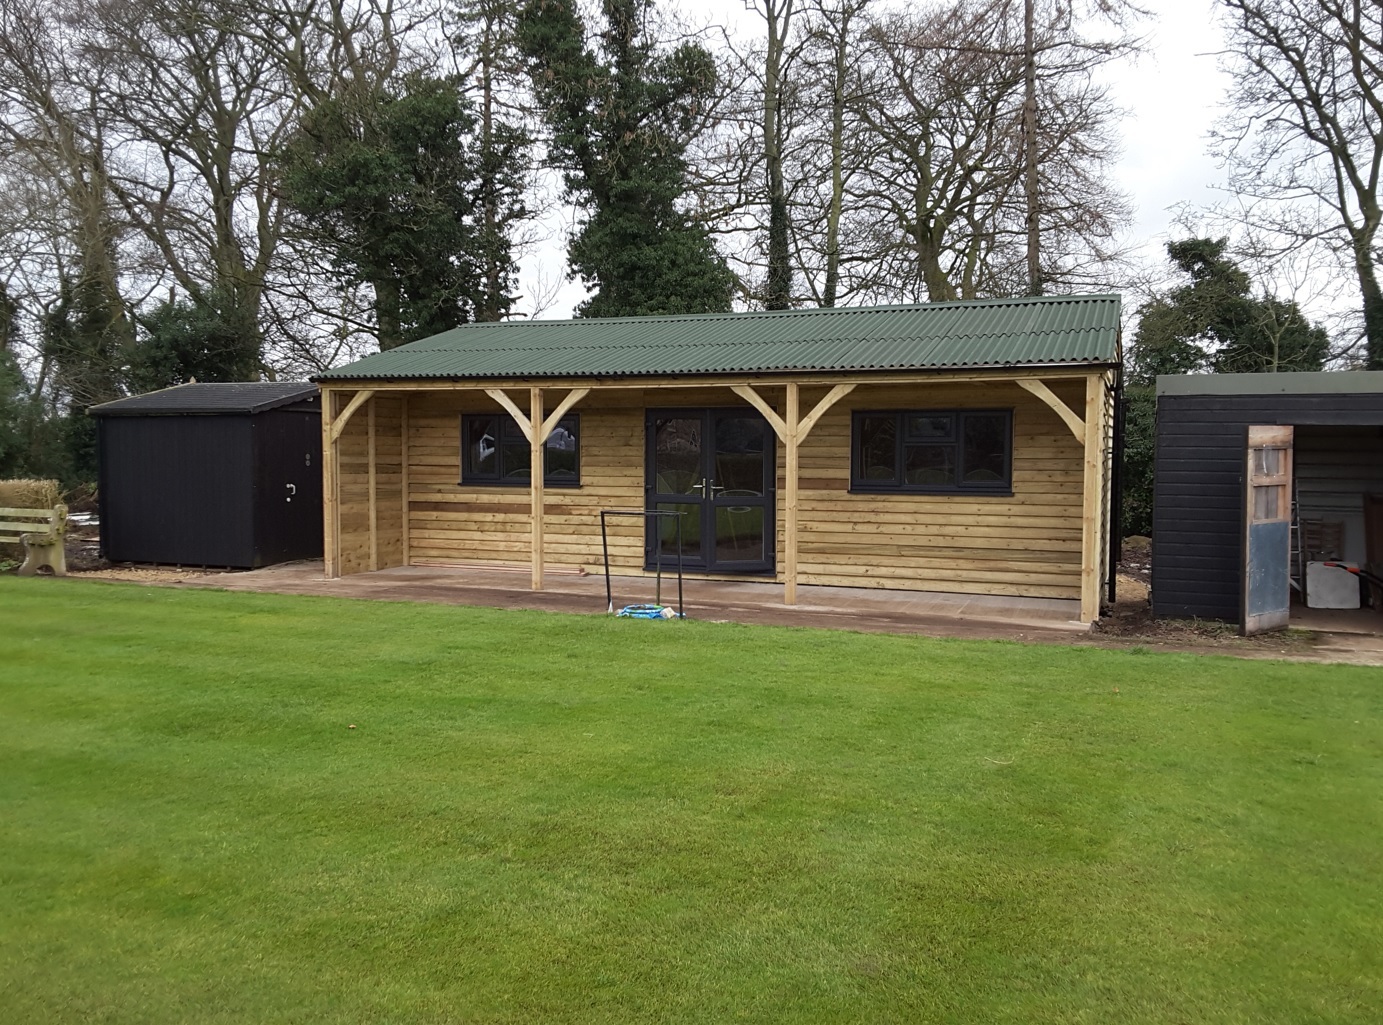 The new pavilion at West Tanfield